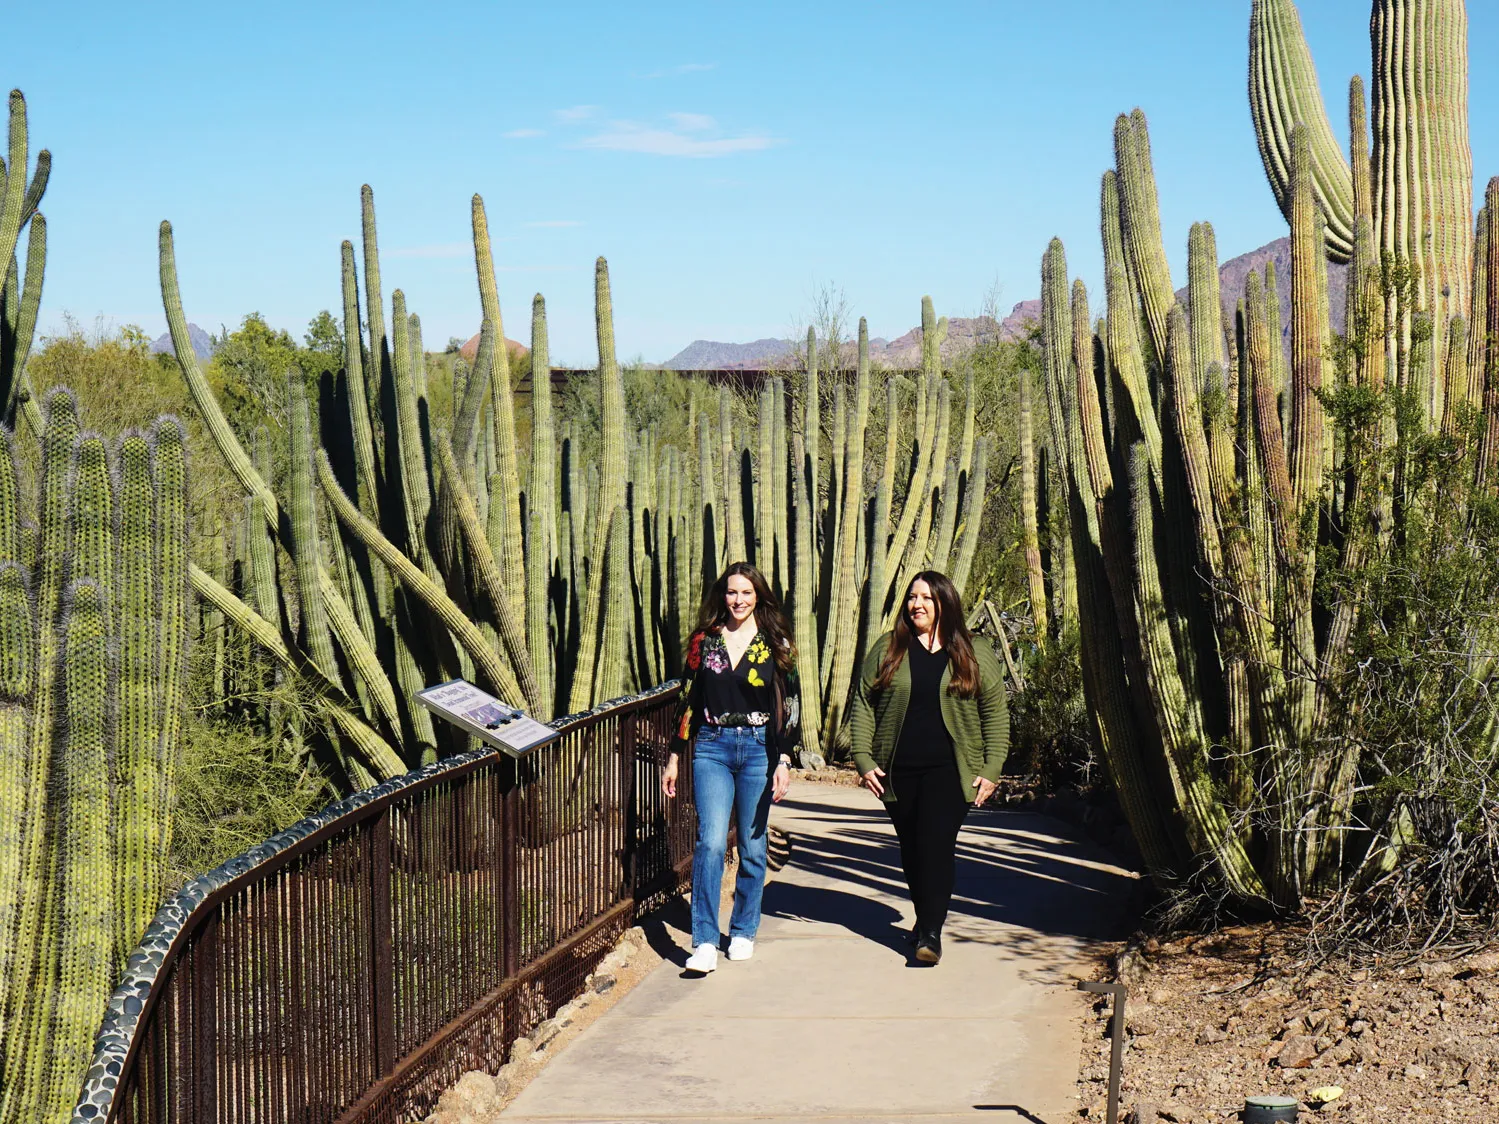 Two women, both with long brown hair, stroll a paved path that threads through cactus stands at least twice as tall as they are. The sky is clear and though it’s a bright day, both wear jeans and sweaters, so it’s not hot. 